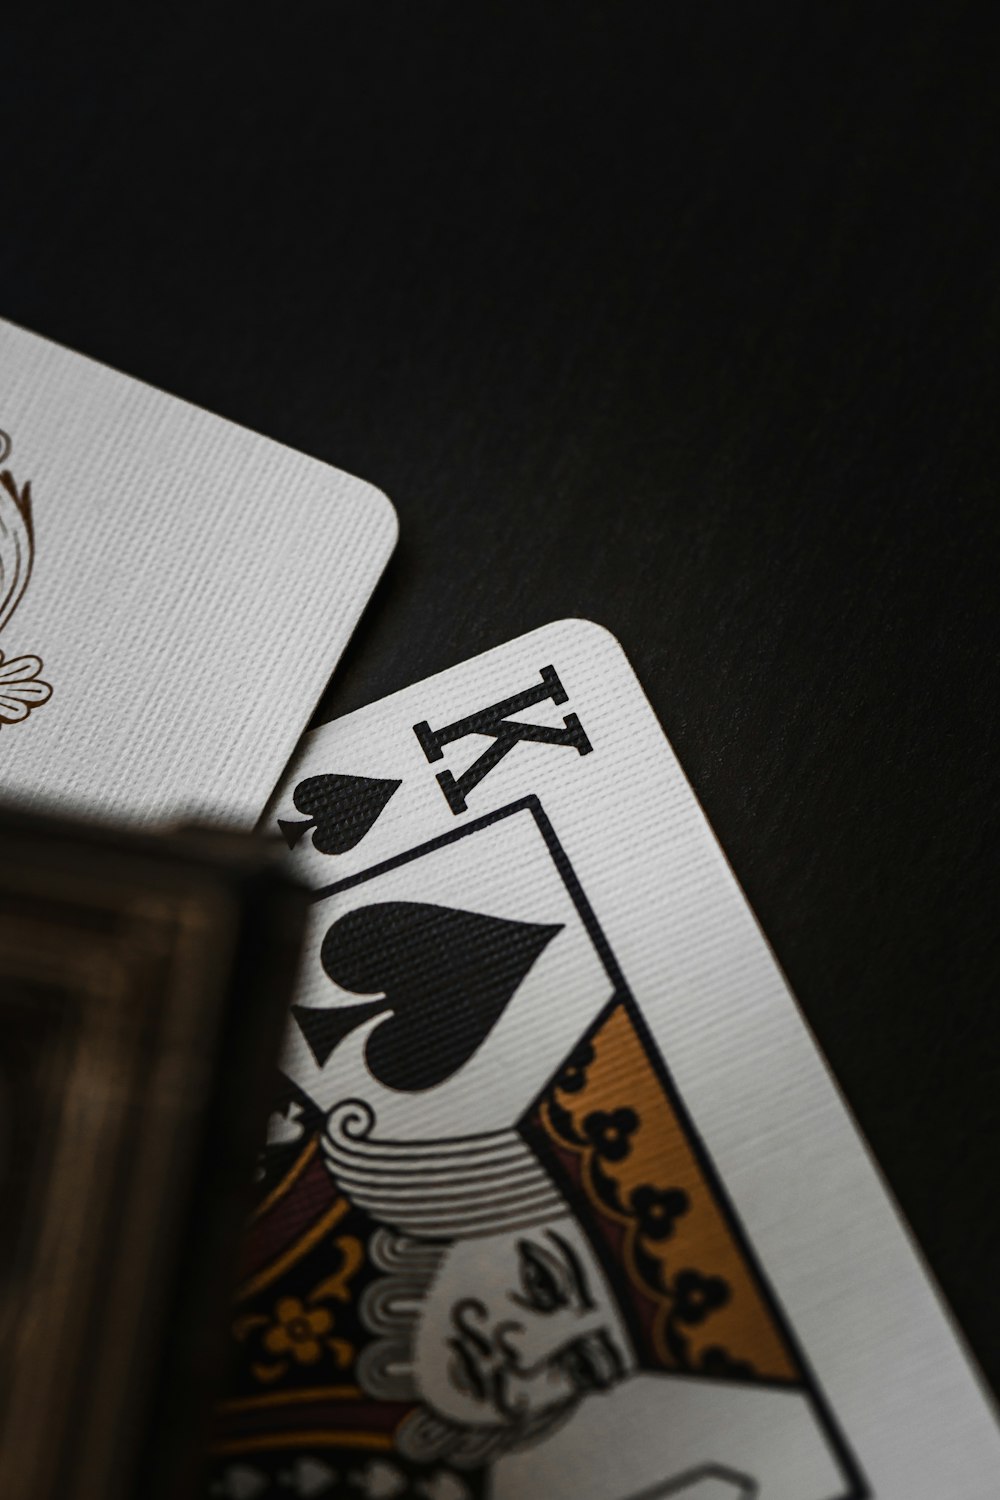 500+ Playing Card Pictures [HQ] | Download Free Images on Unsplash